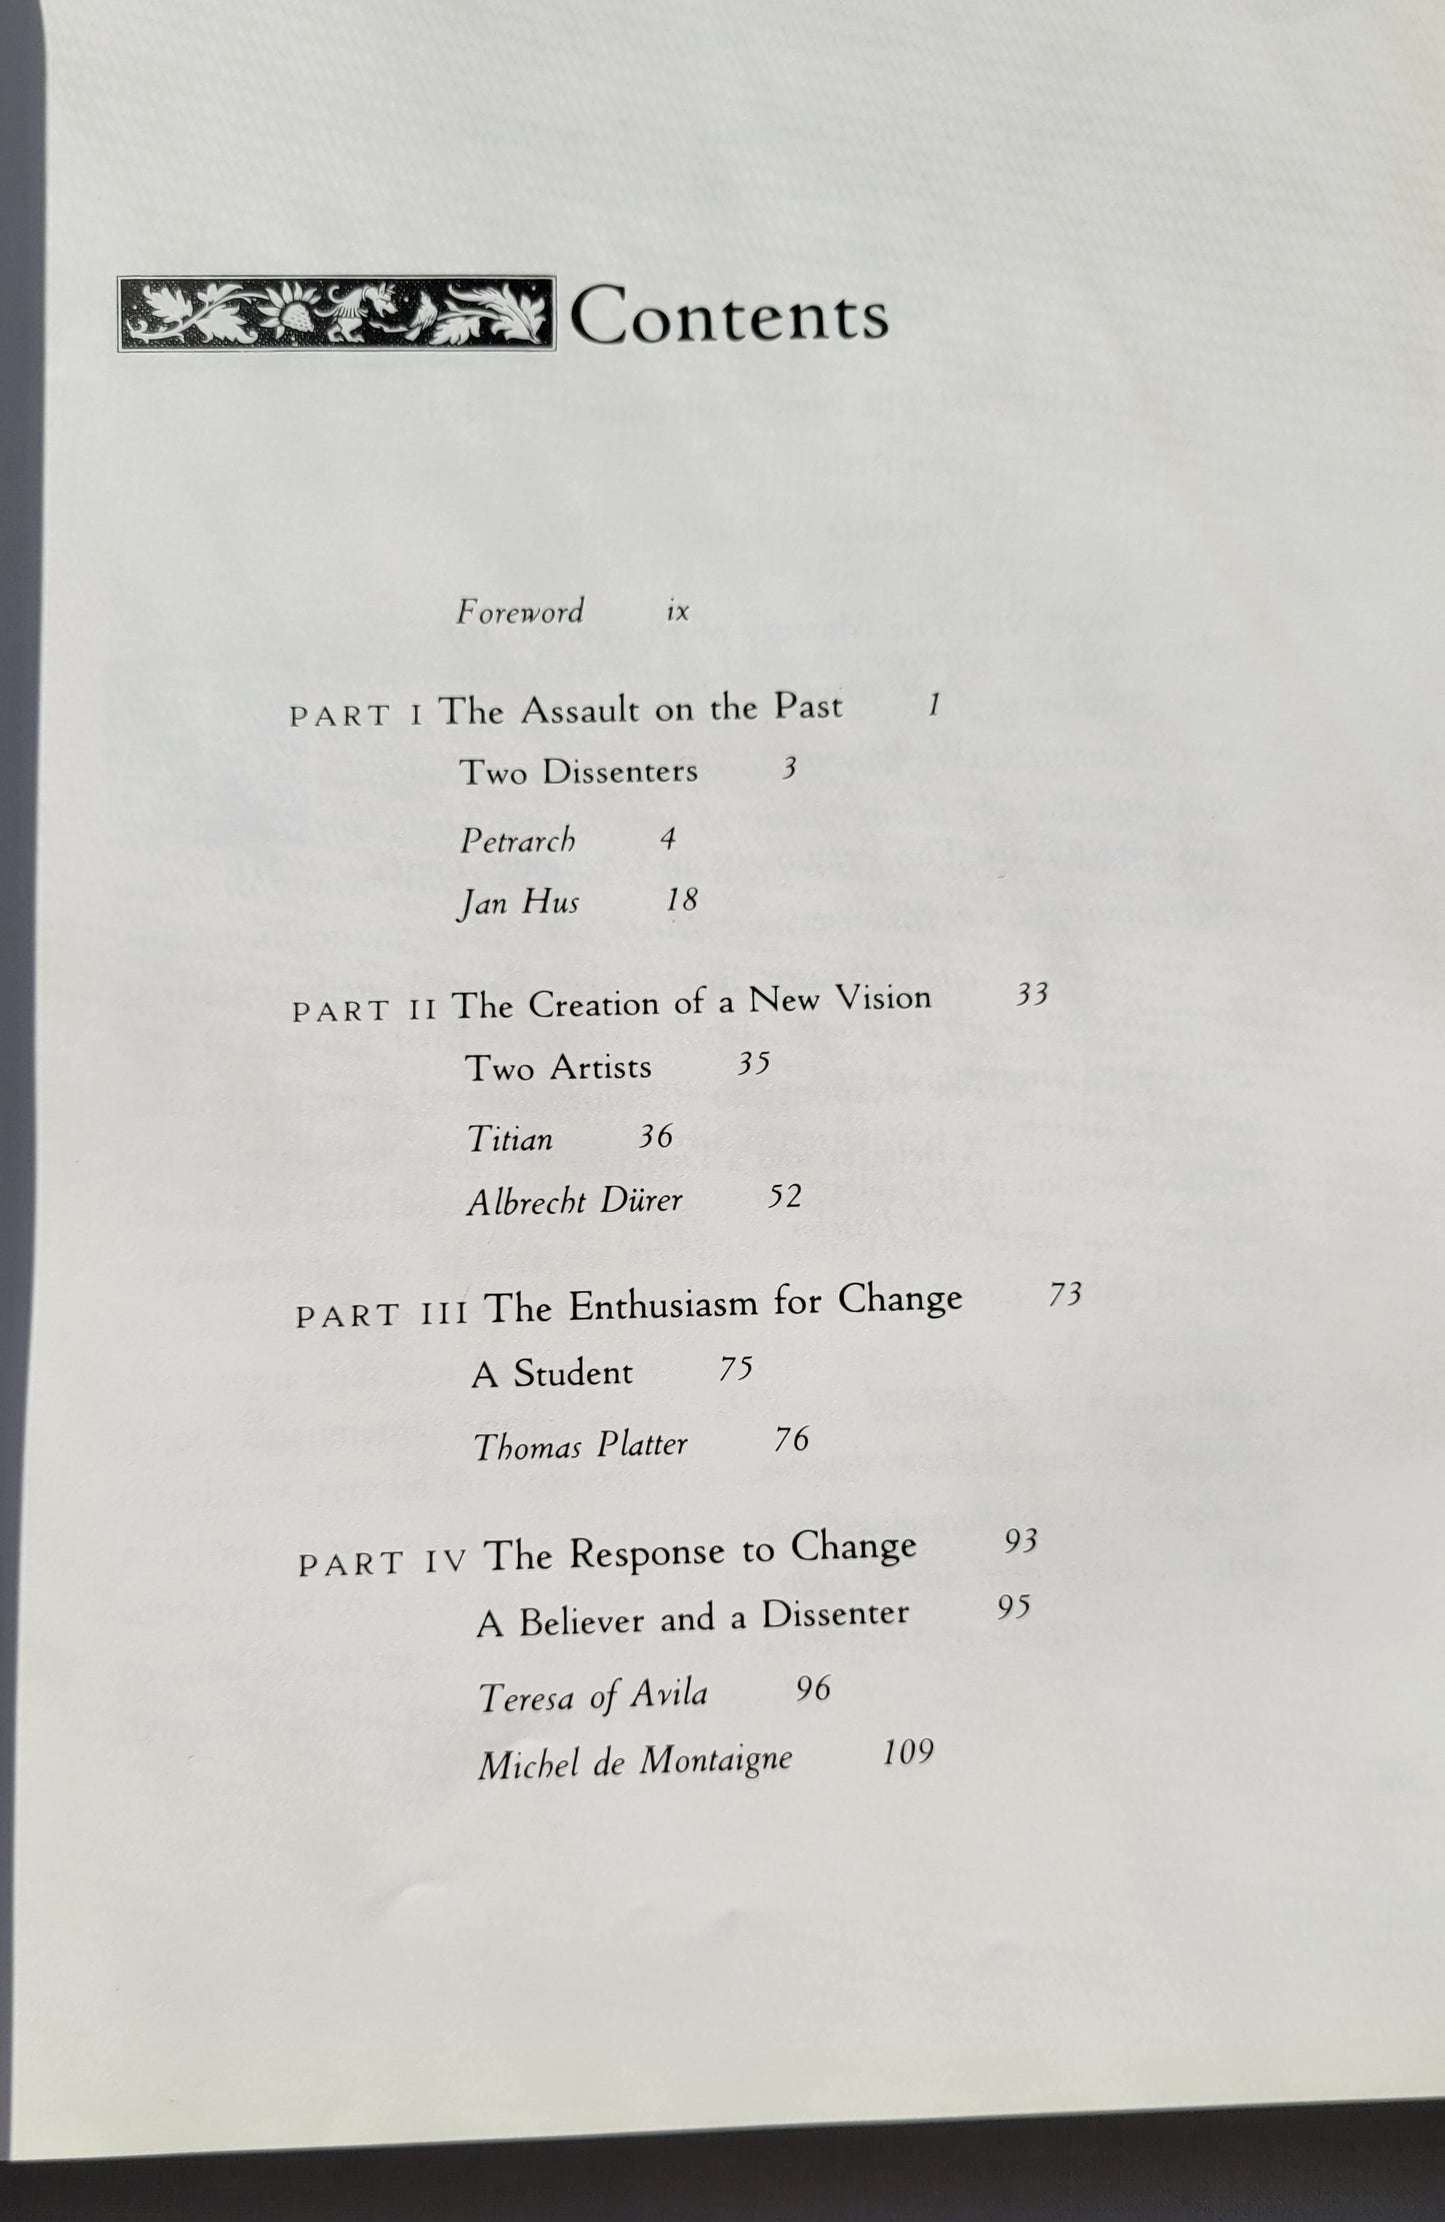 Used book for sale, "Renaissance Lives: Portraits of an Age" by Theodore K. Rabb published by Basic Books in 1993. View of table of contents.